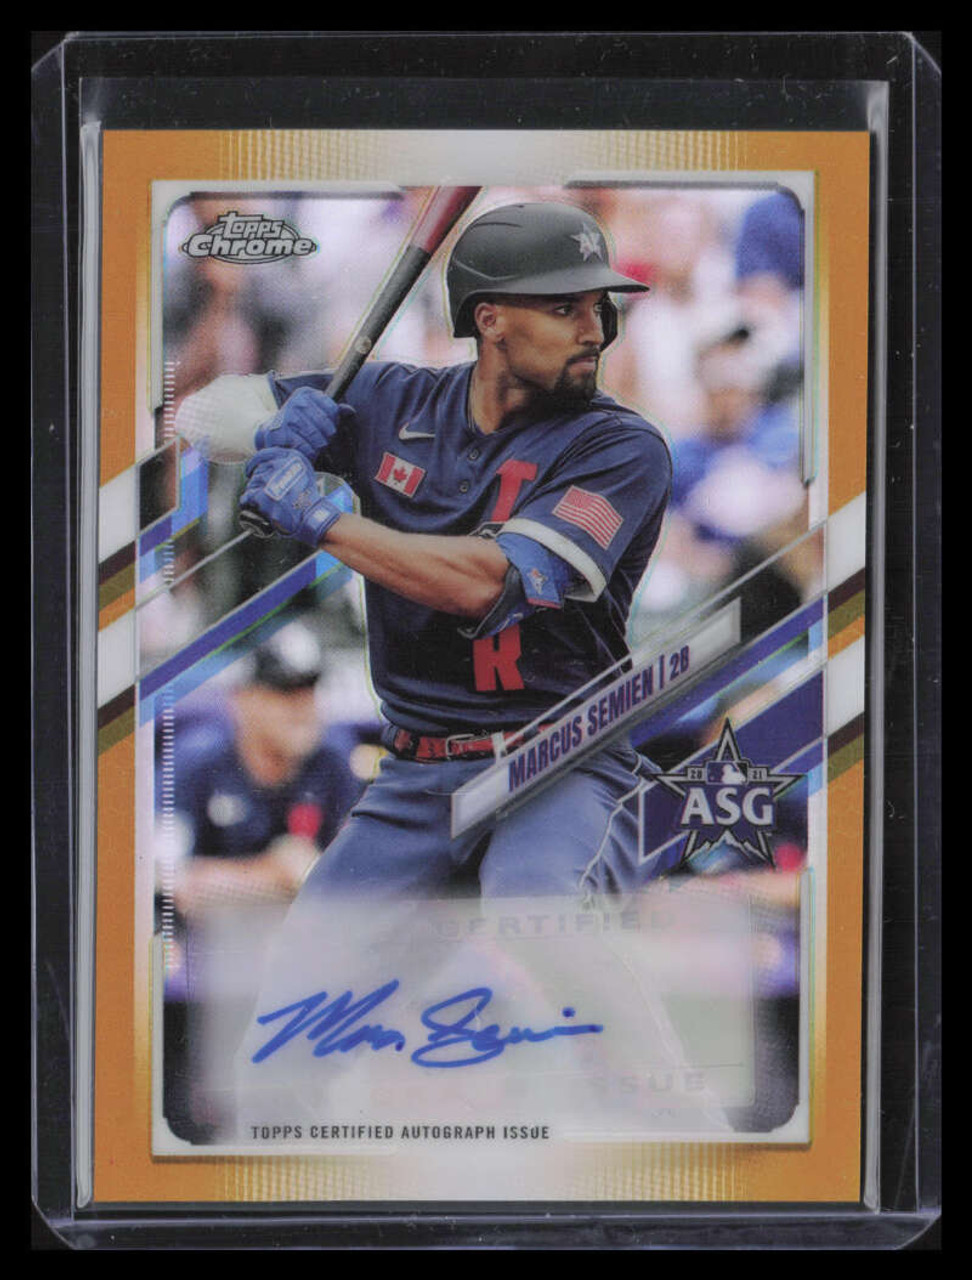 2021 Topps Chrome Update All Star Game Gold Refractor Marcus Semien Auto  41/50